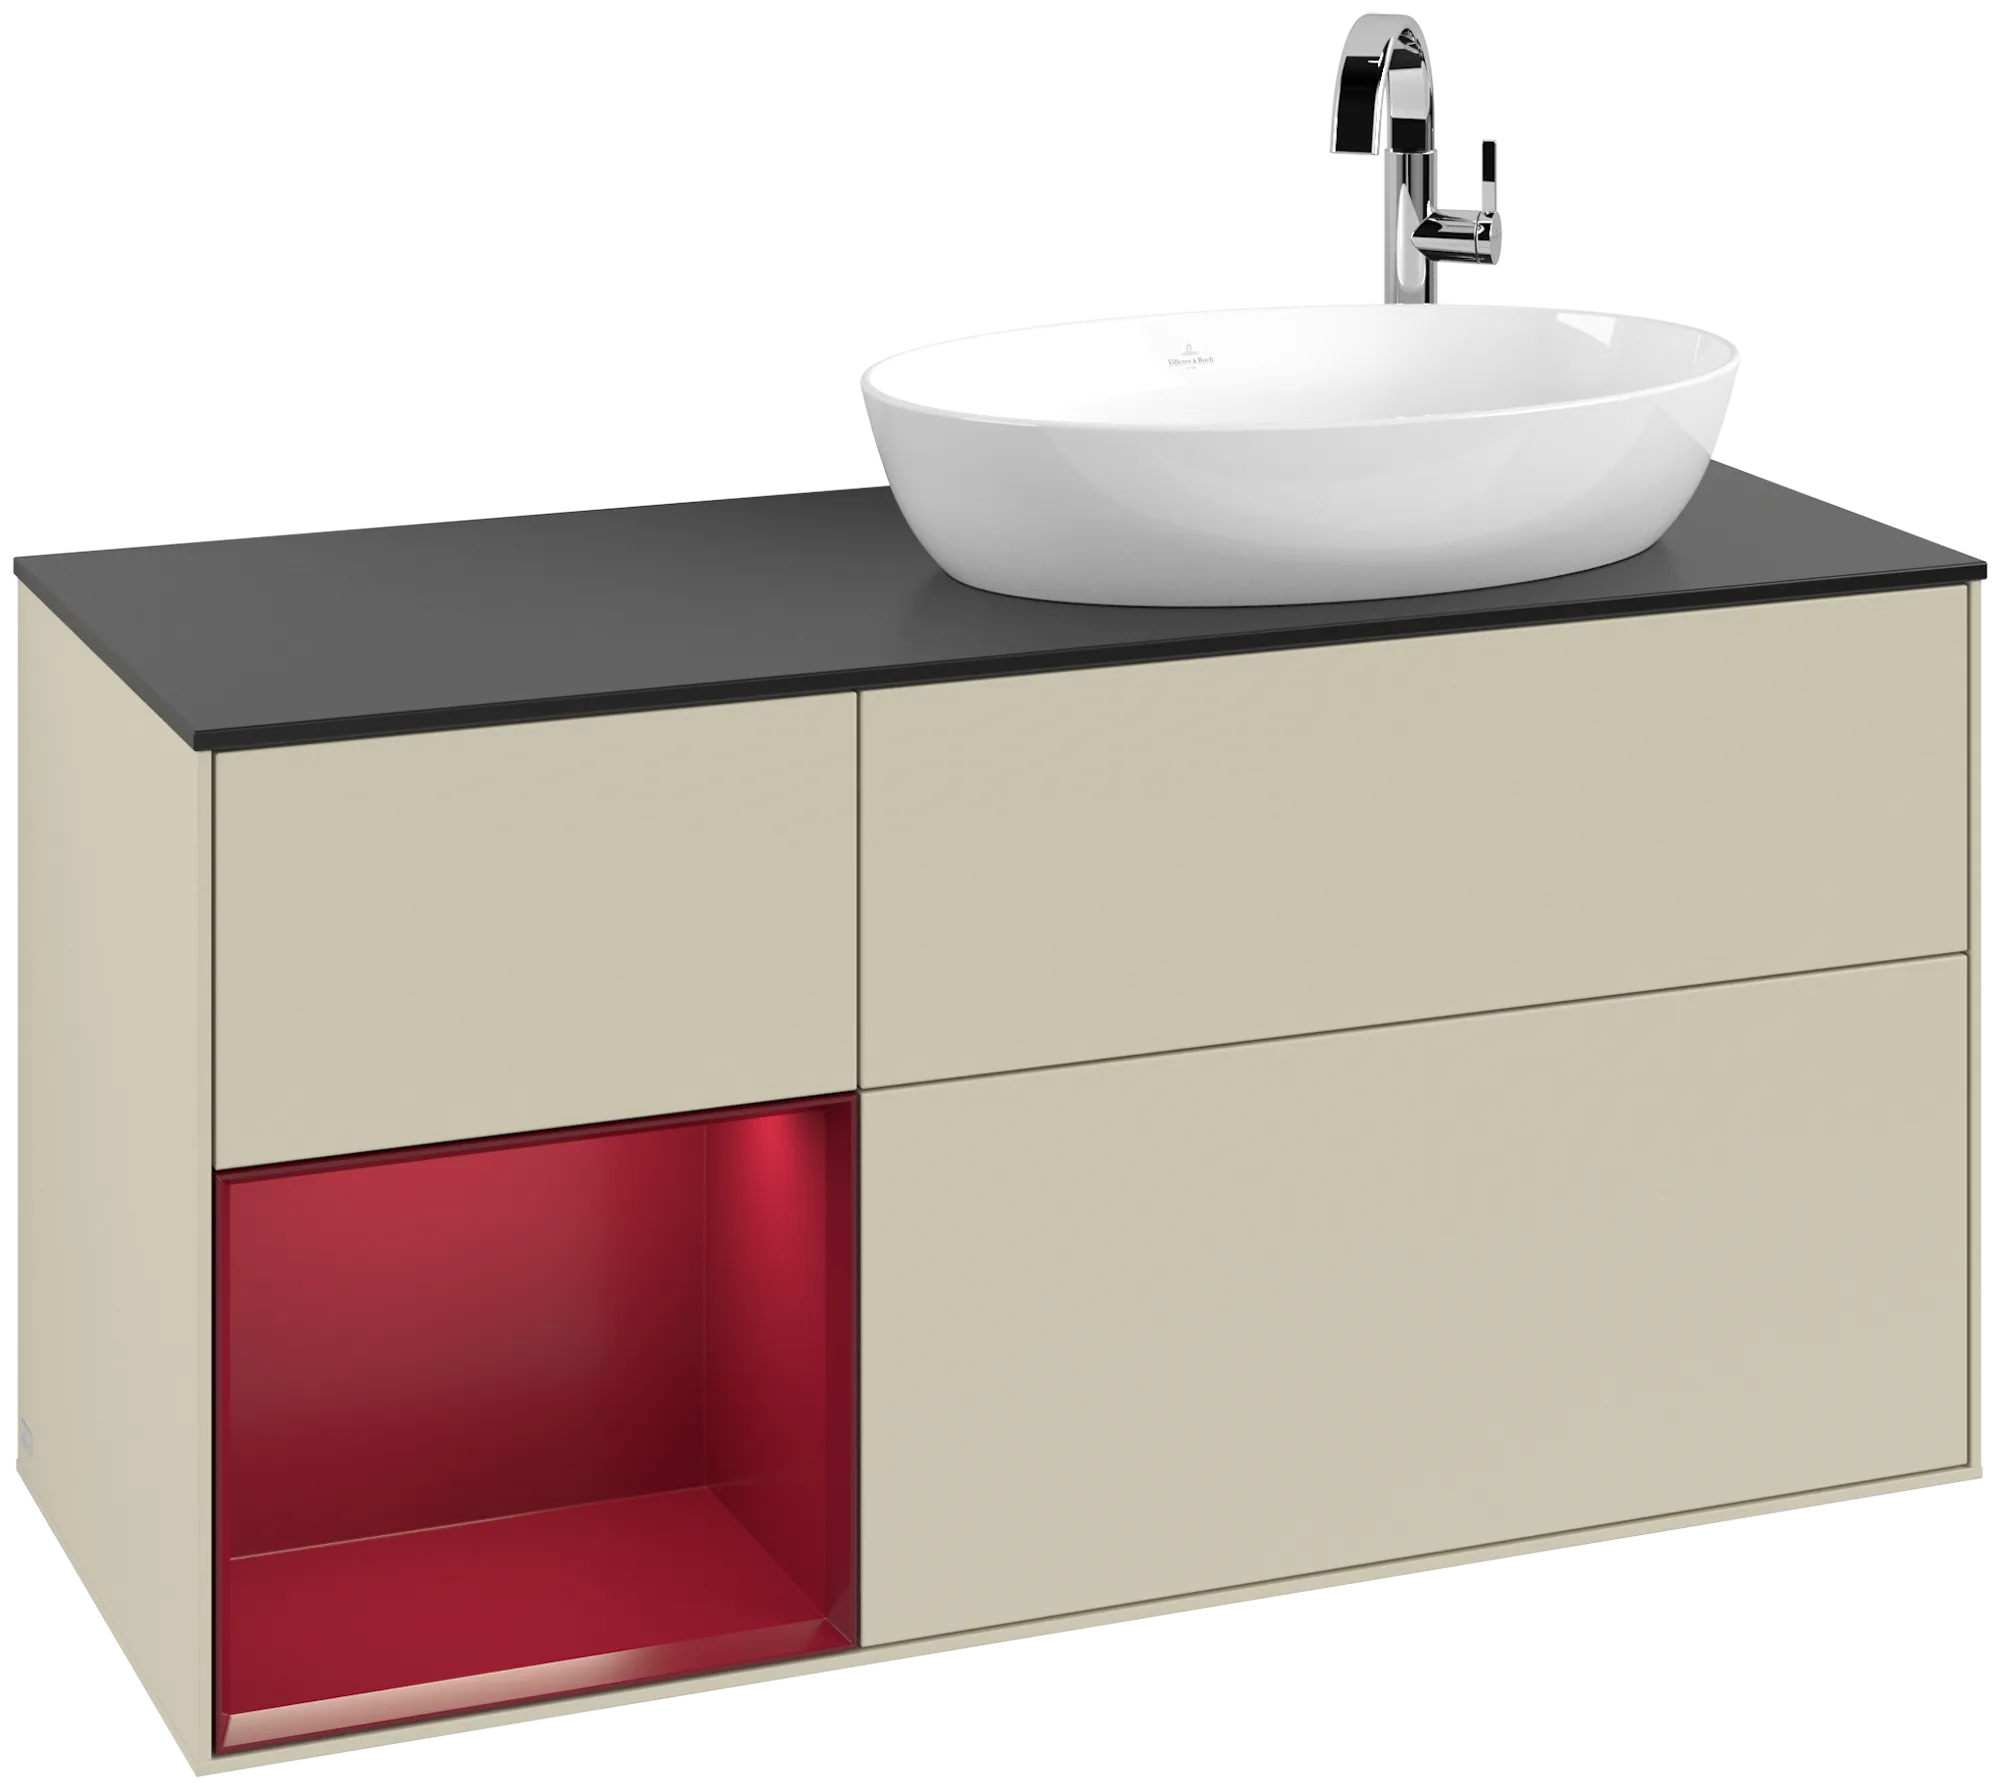 Picture of VILLEROY BOCH Finion Vanity unit, with lighting, 3 pull-out compartments, 1200 x 603 x 501 mm, Silk Grey Matt Lacquer / Peony Matt Lacquer / Glass Black Matt #G922HBHJ